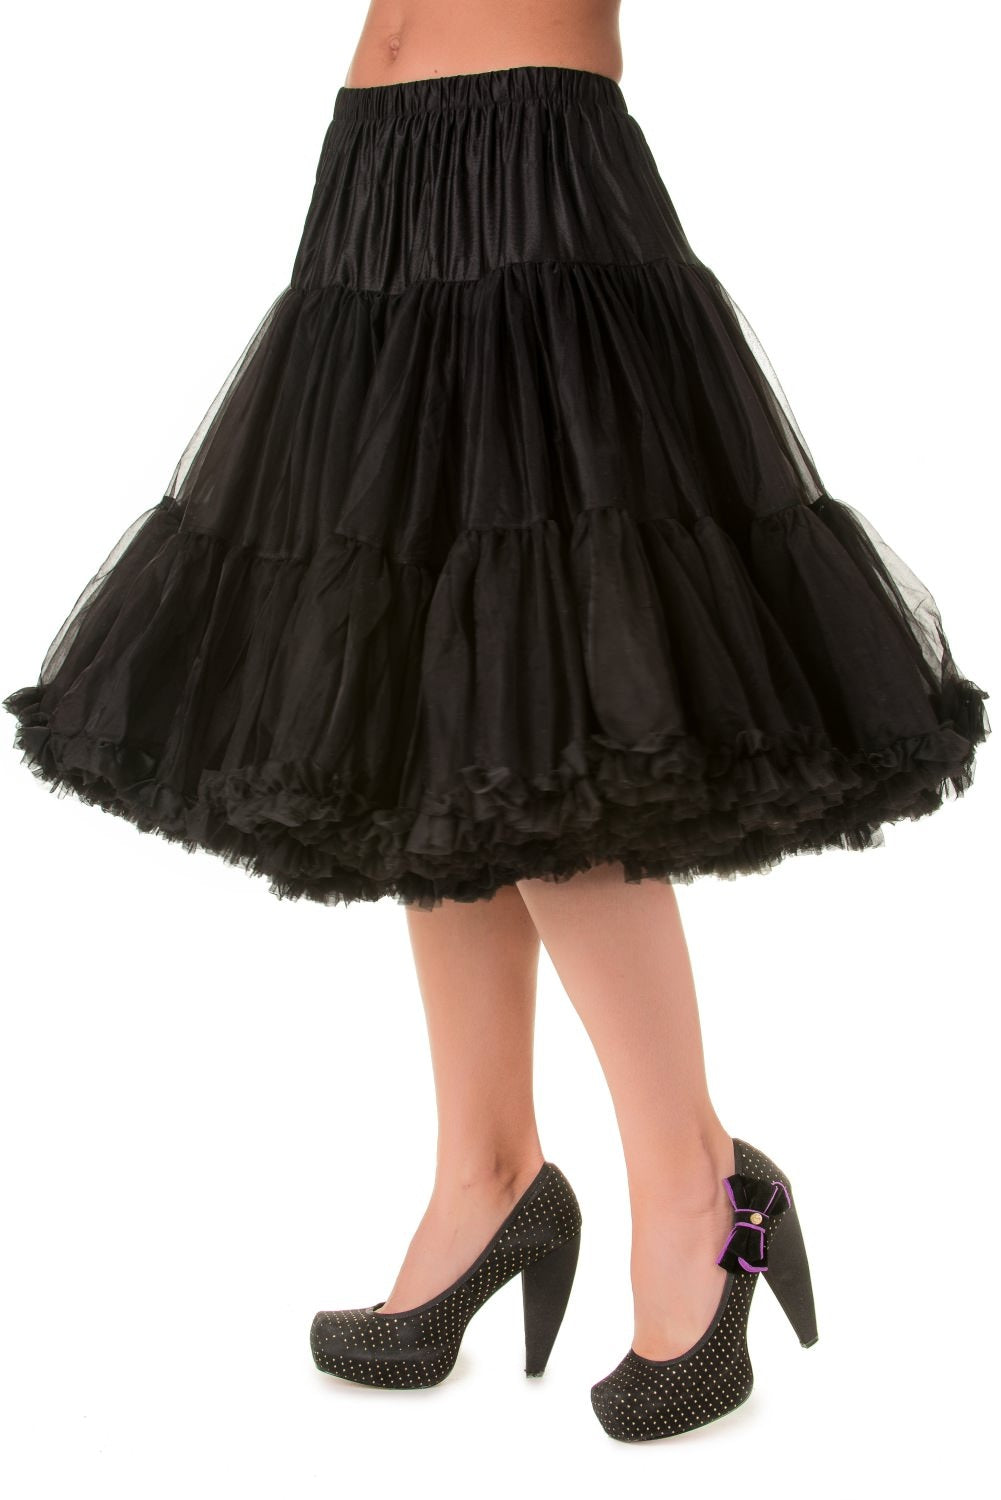 Model with mini polka dot high heels wearing the Lifeforms Black Petticoat by Banned